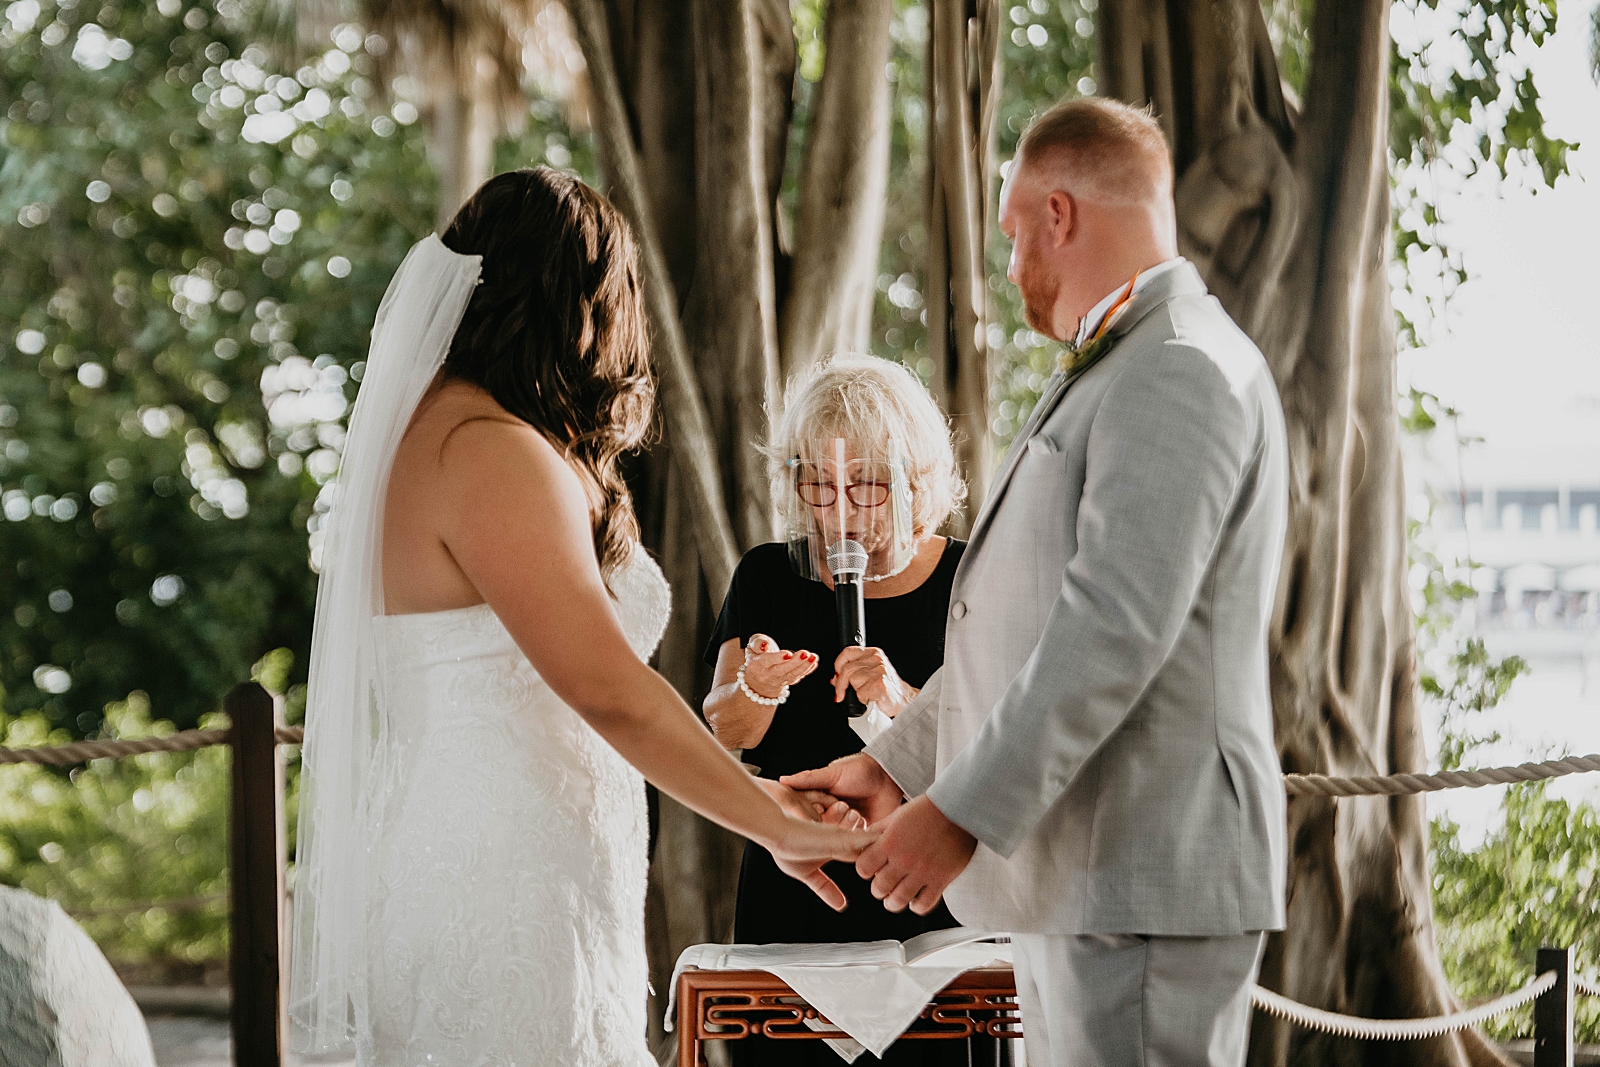 Ceremony with officiant face shield staying safe Jupiter Lighthouse Wedding Photography captured by South Florida Wedding Photographer Krystal Capone Photography